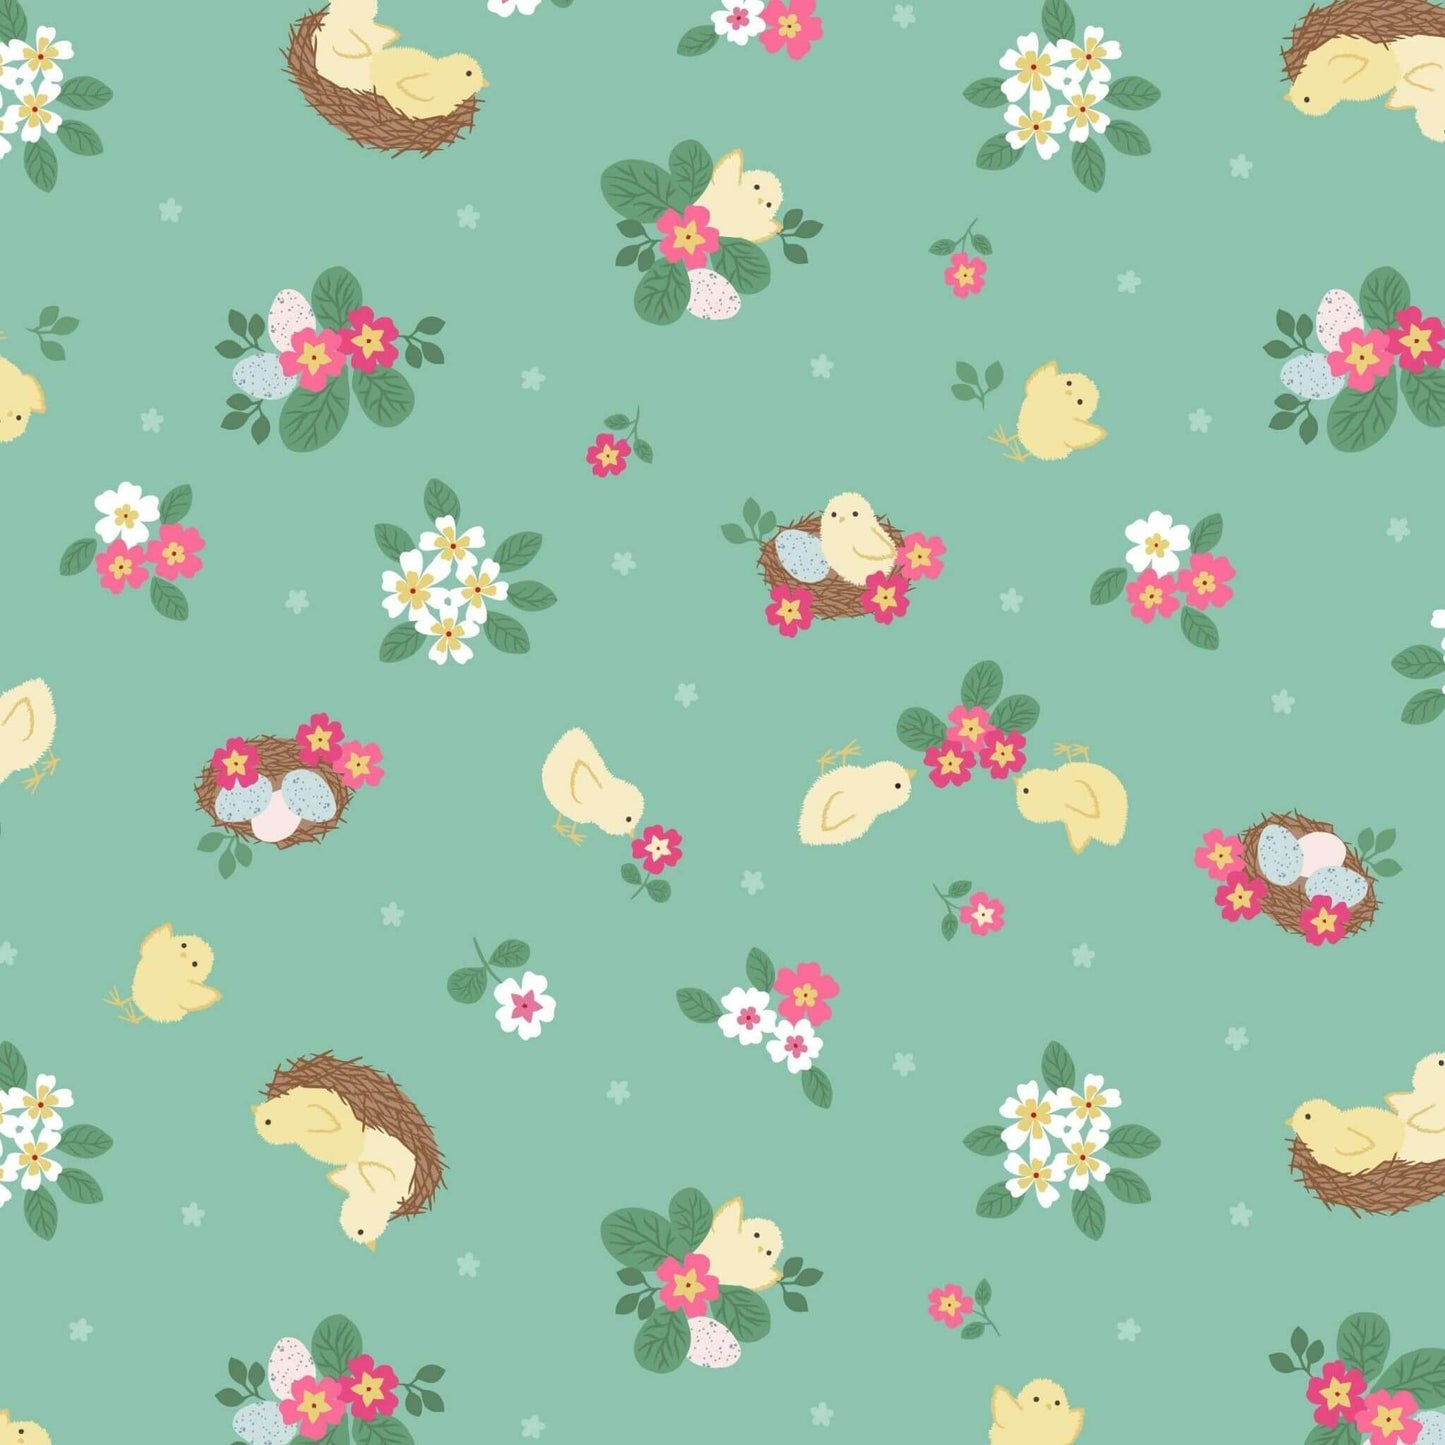 Chicks - Bunny Hop Fabric Range - Lewis and Irene - Spring Green